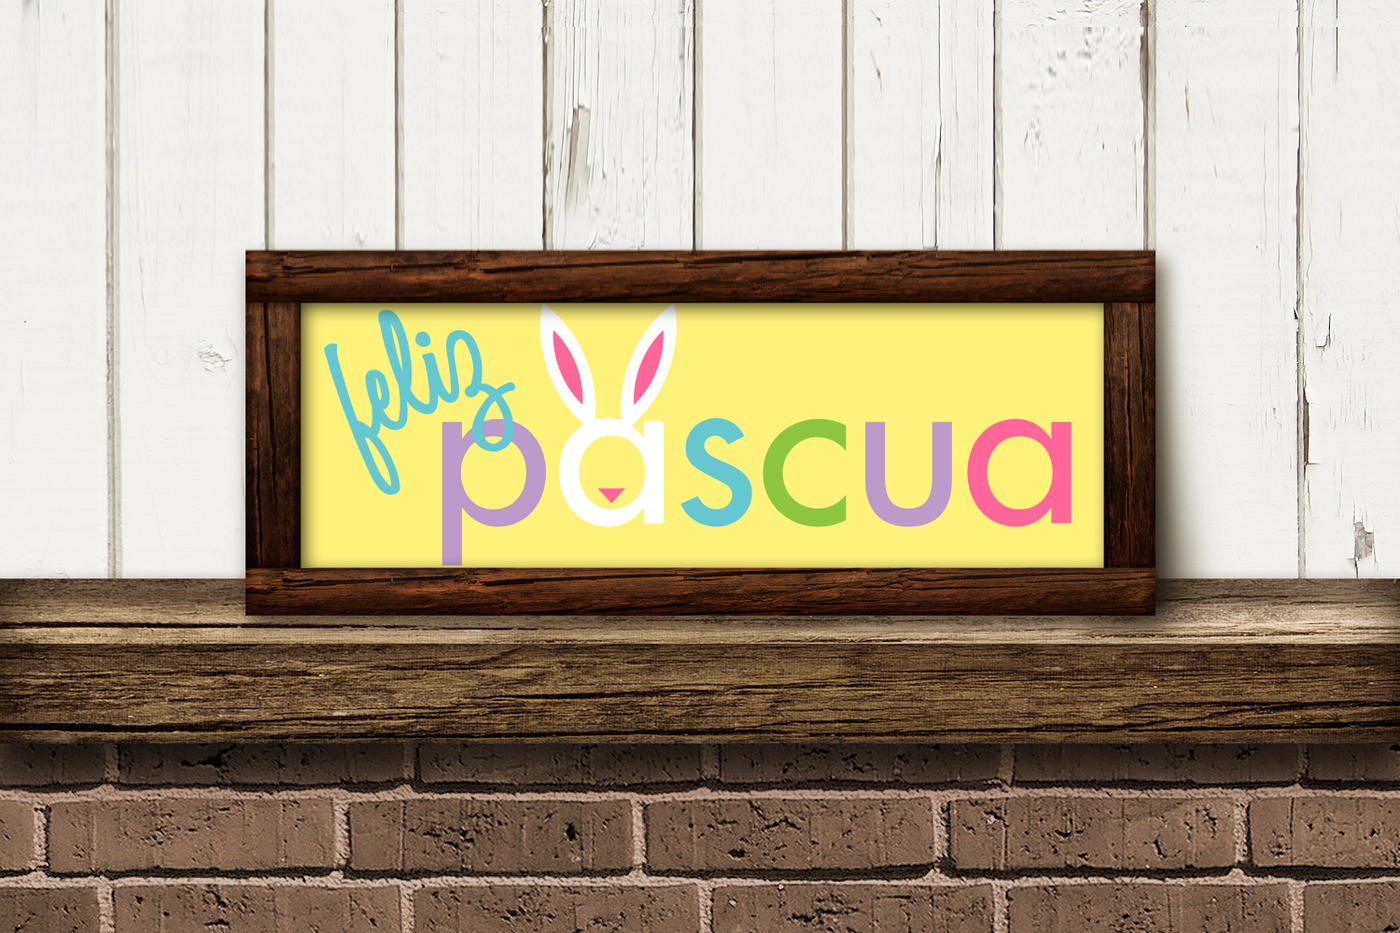 A horizontal sign that says "feliz pascua" with bunny ears and a nose on the first a.